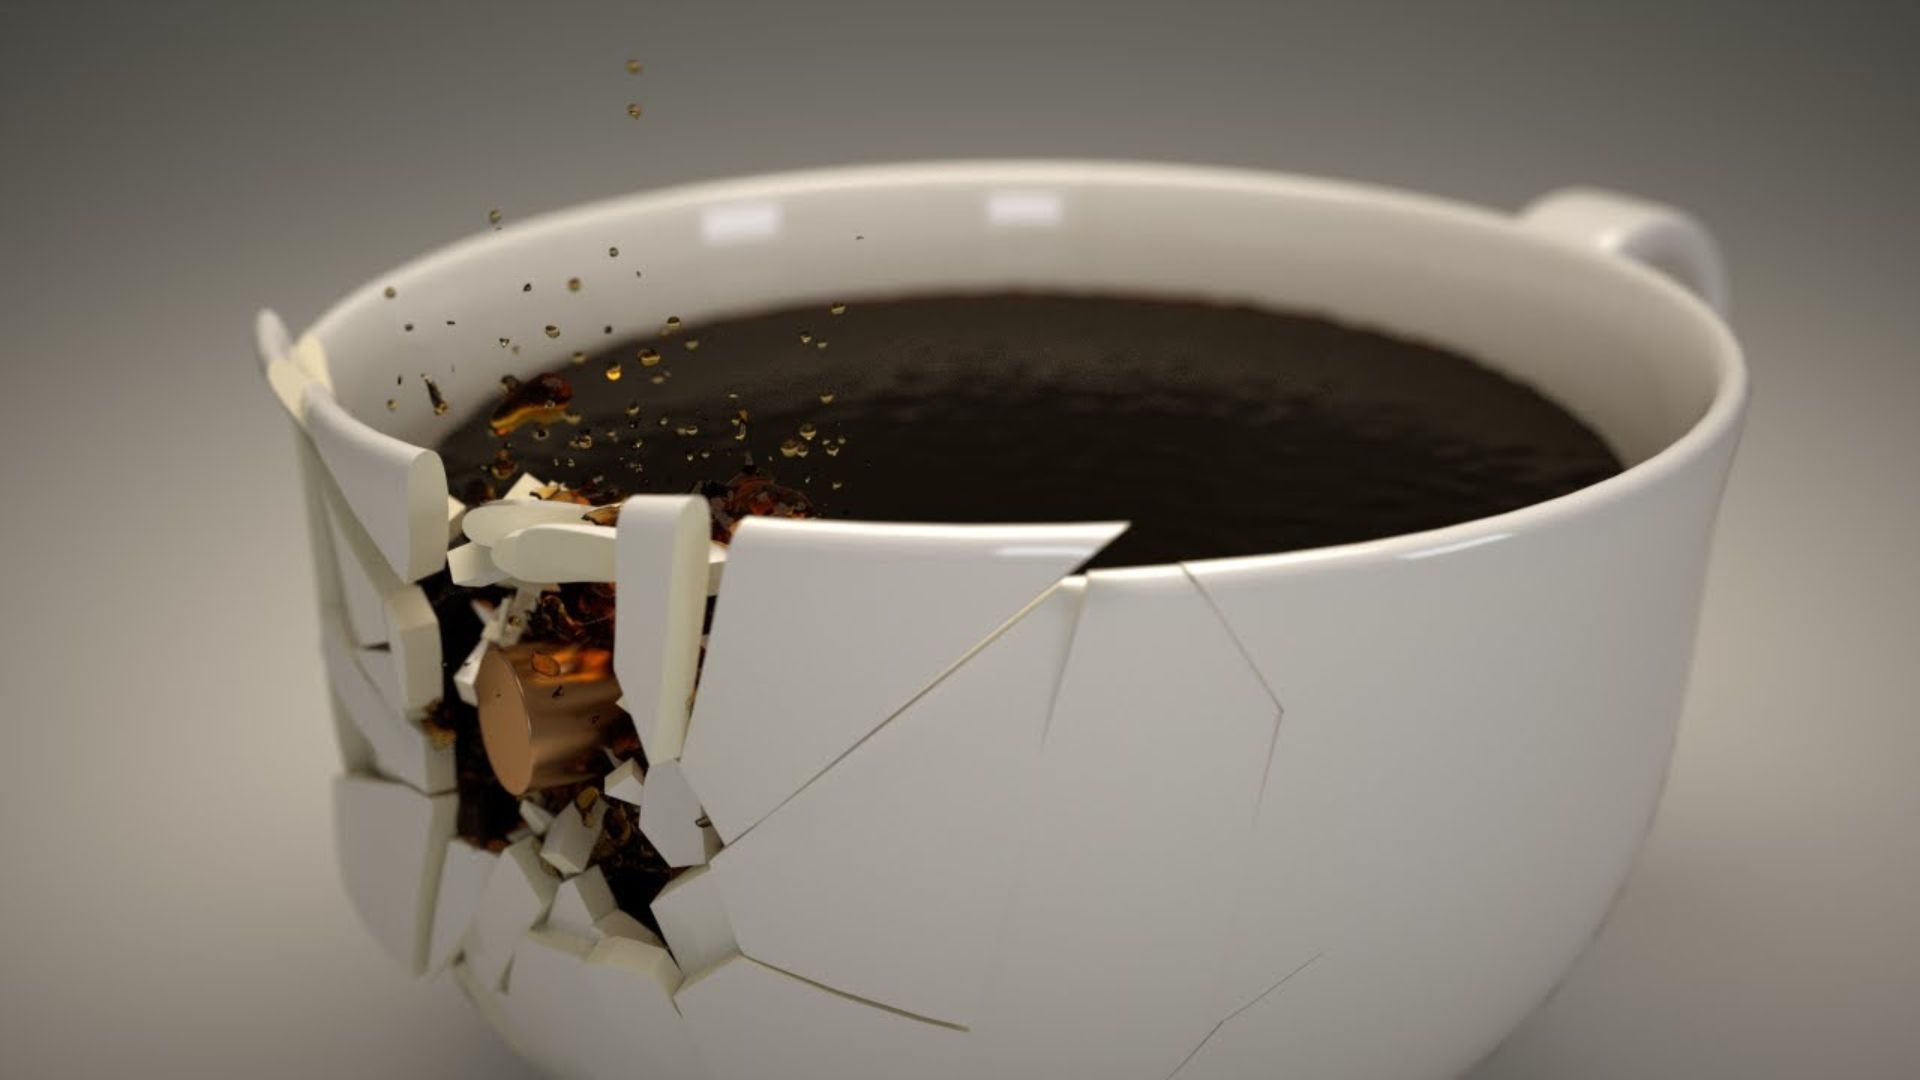 White Cup Filled With Black Liquid Breaking From The Top